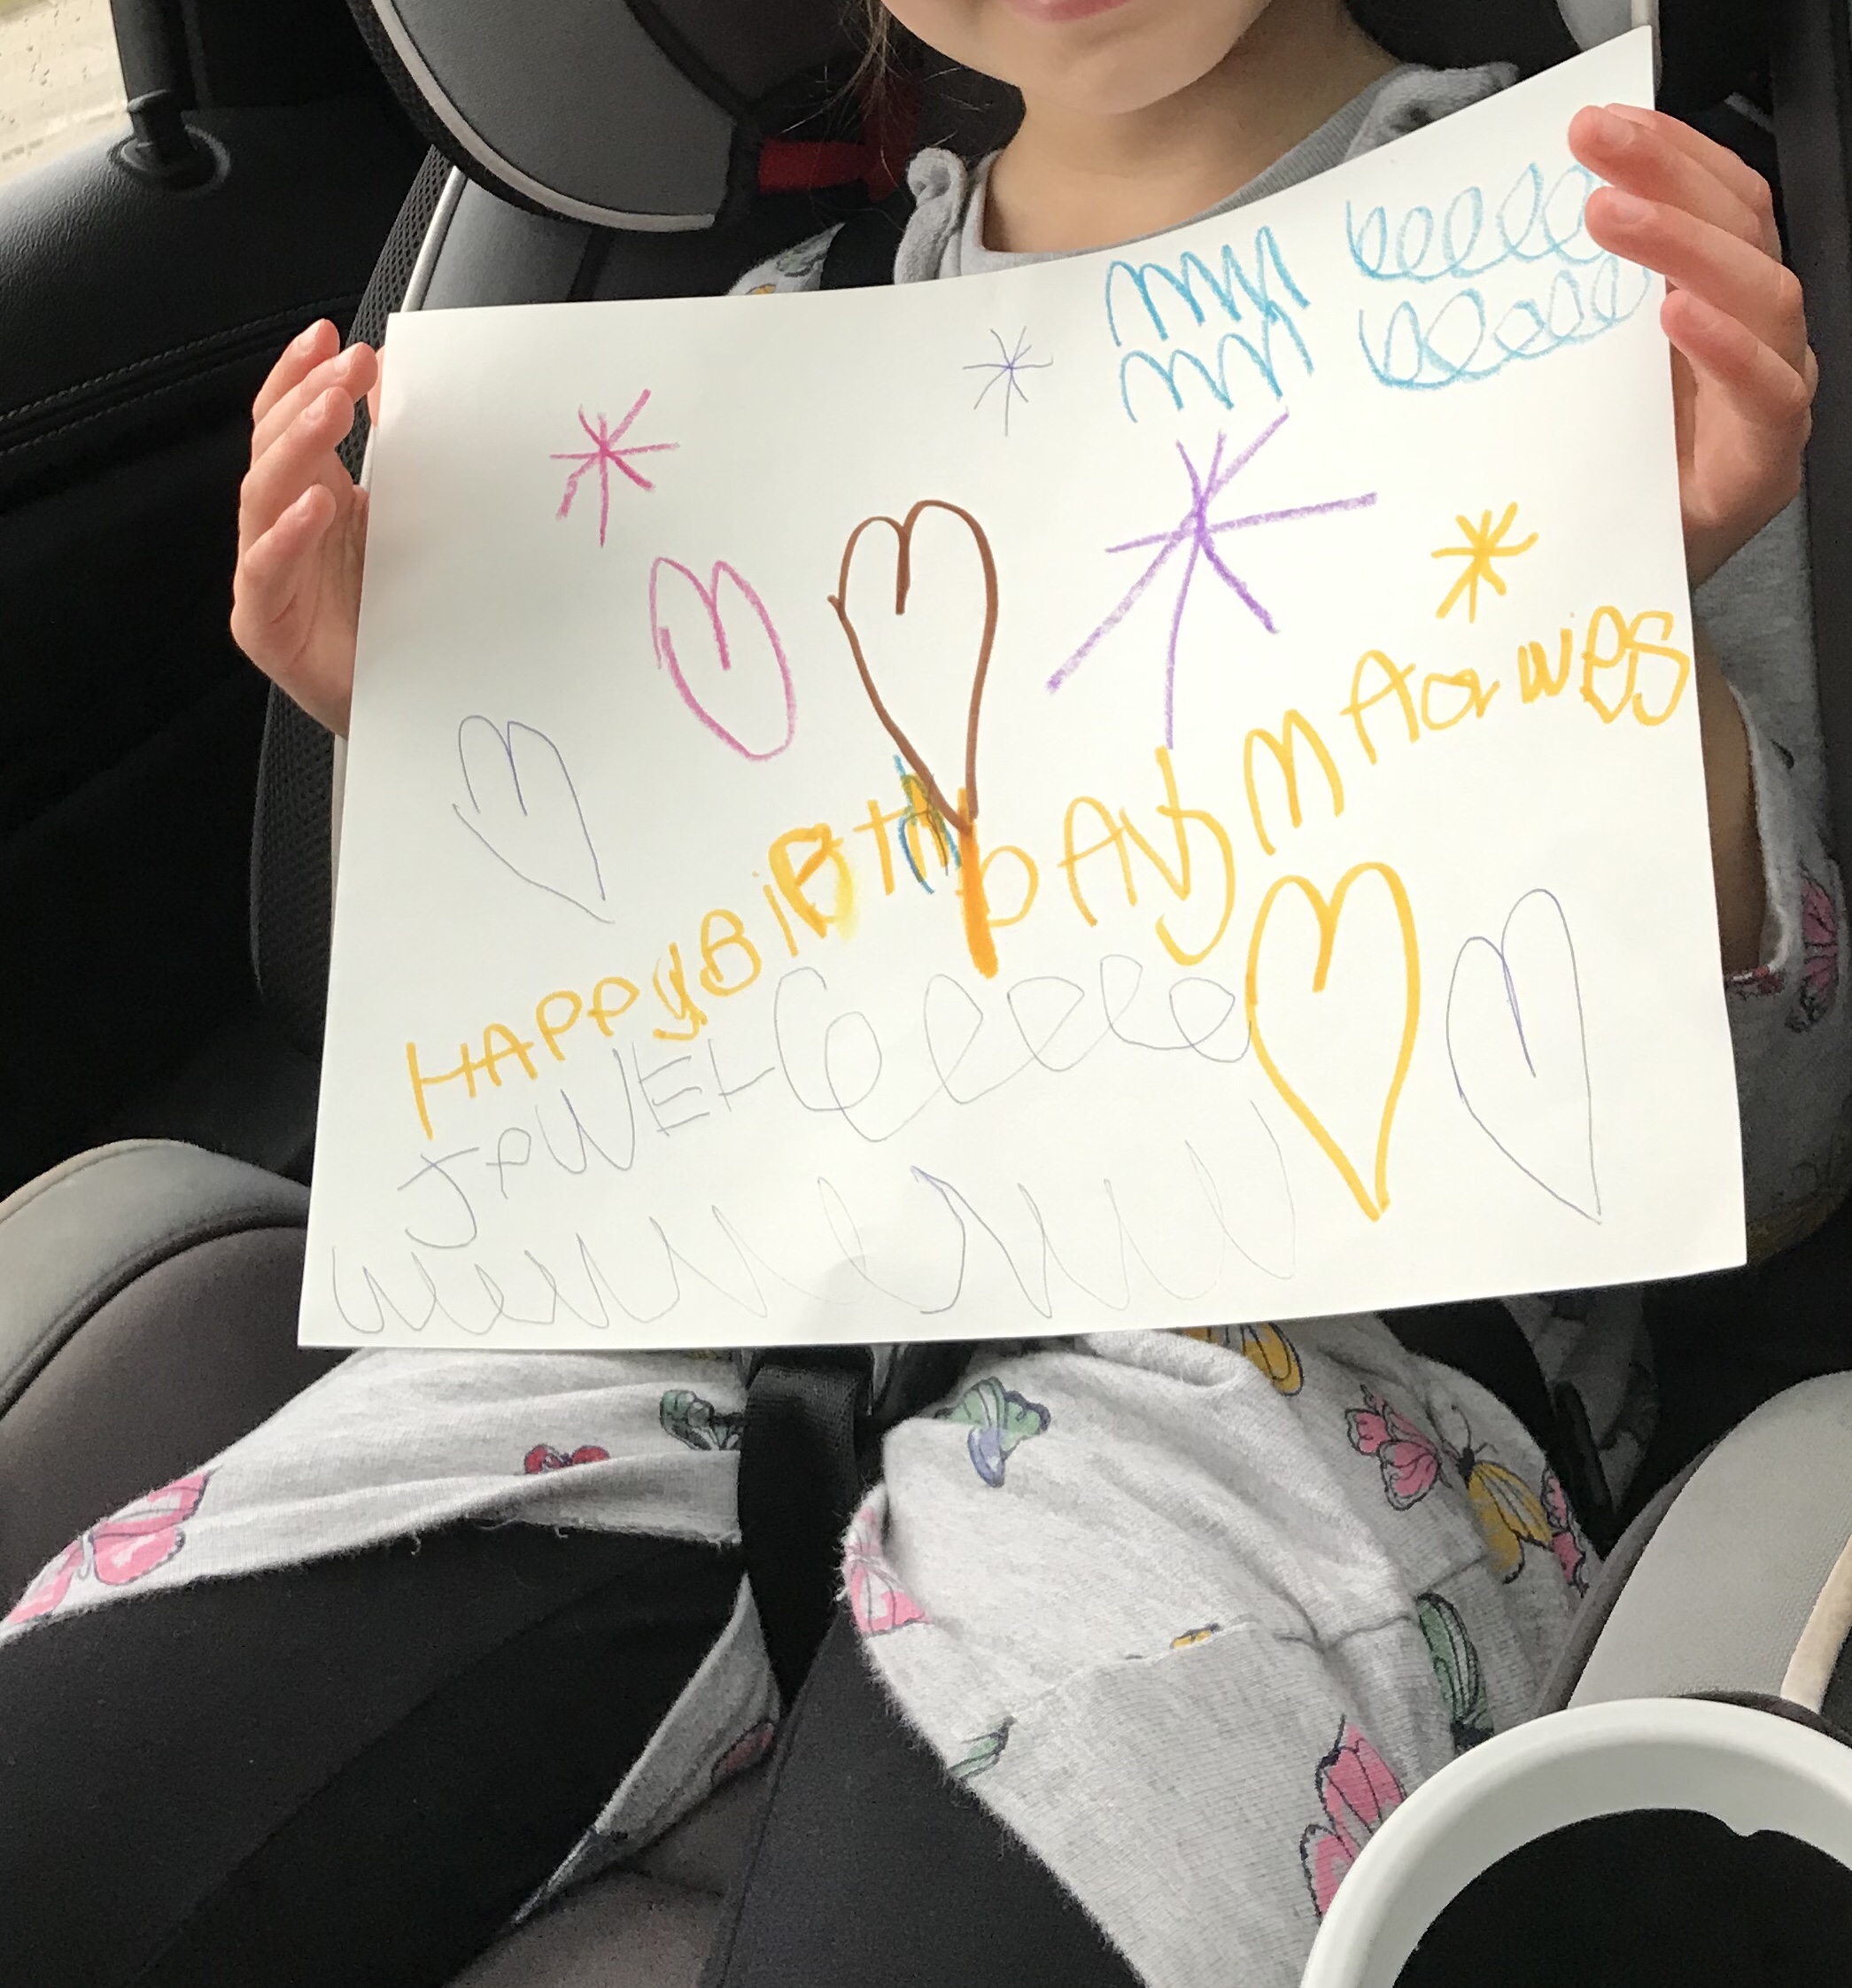 Kid Friendly New England-handwriting practice making cards